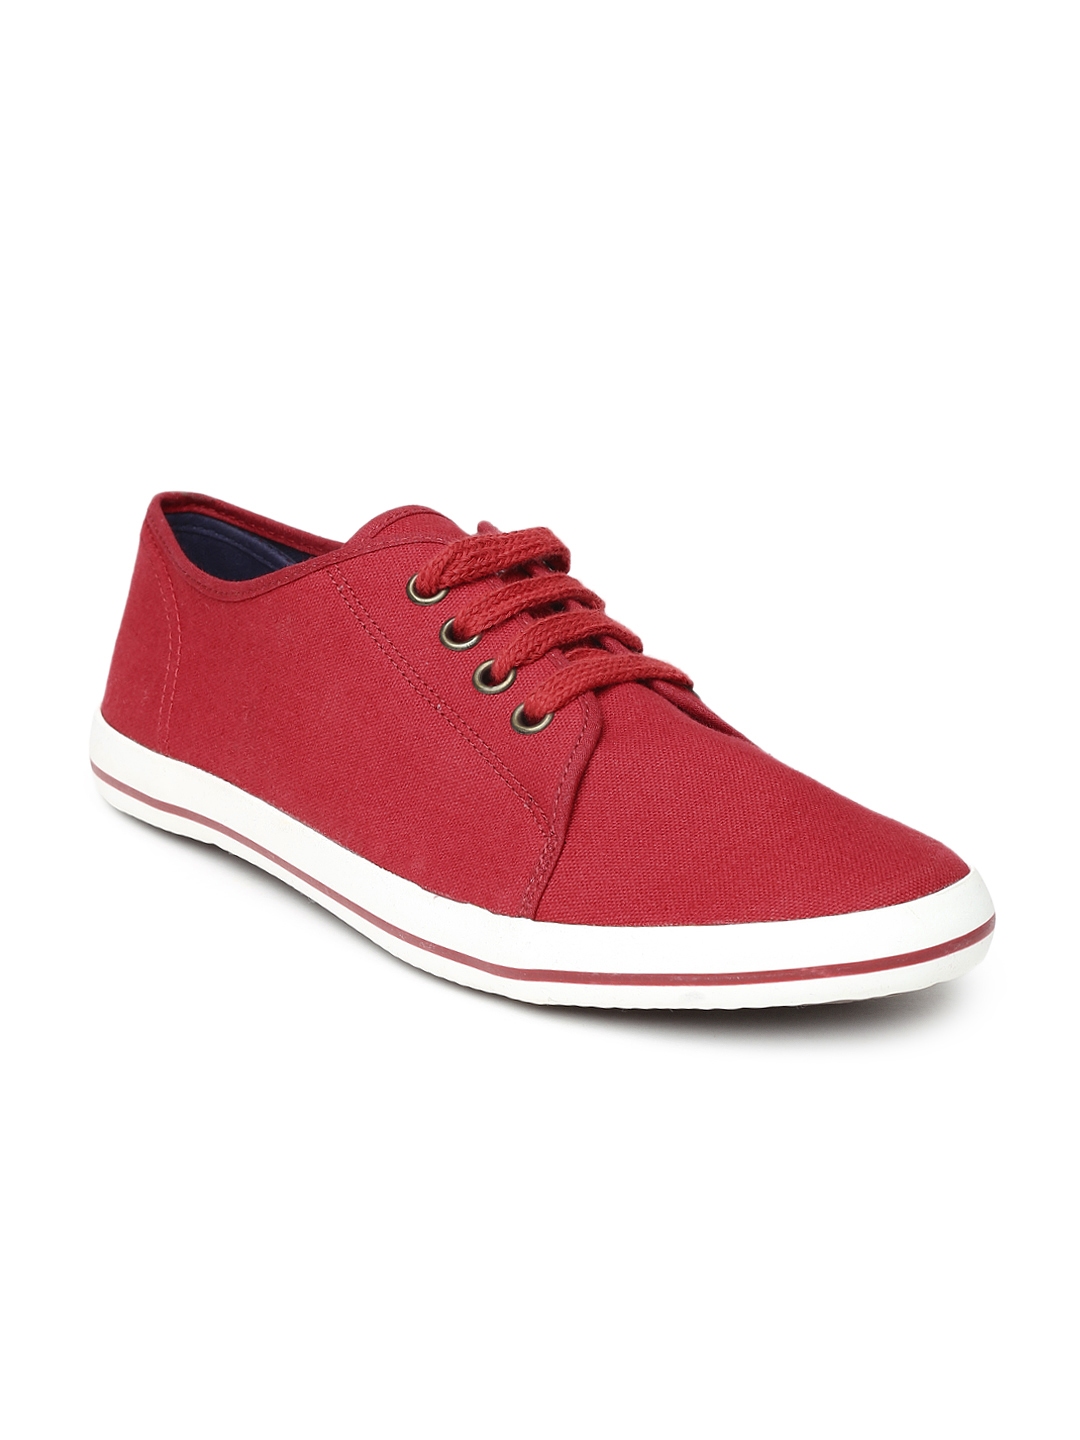 Buy Roadster Men Red Casual Shoes - Casual Shoes for Men 1095381 | Myntra